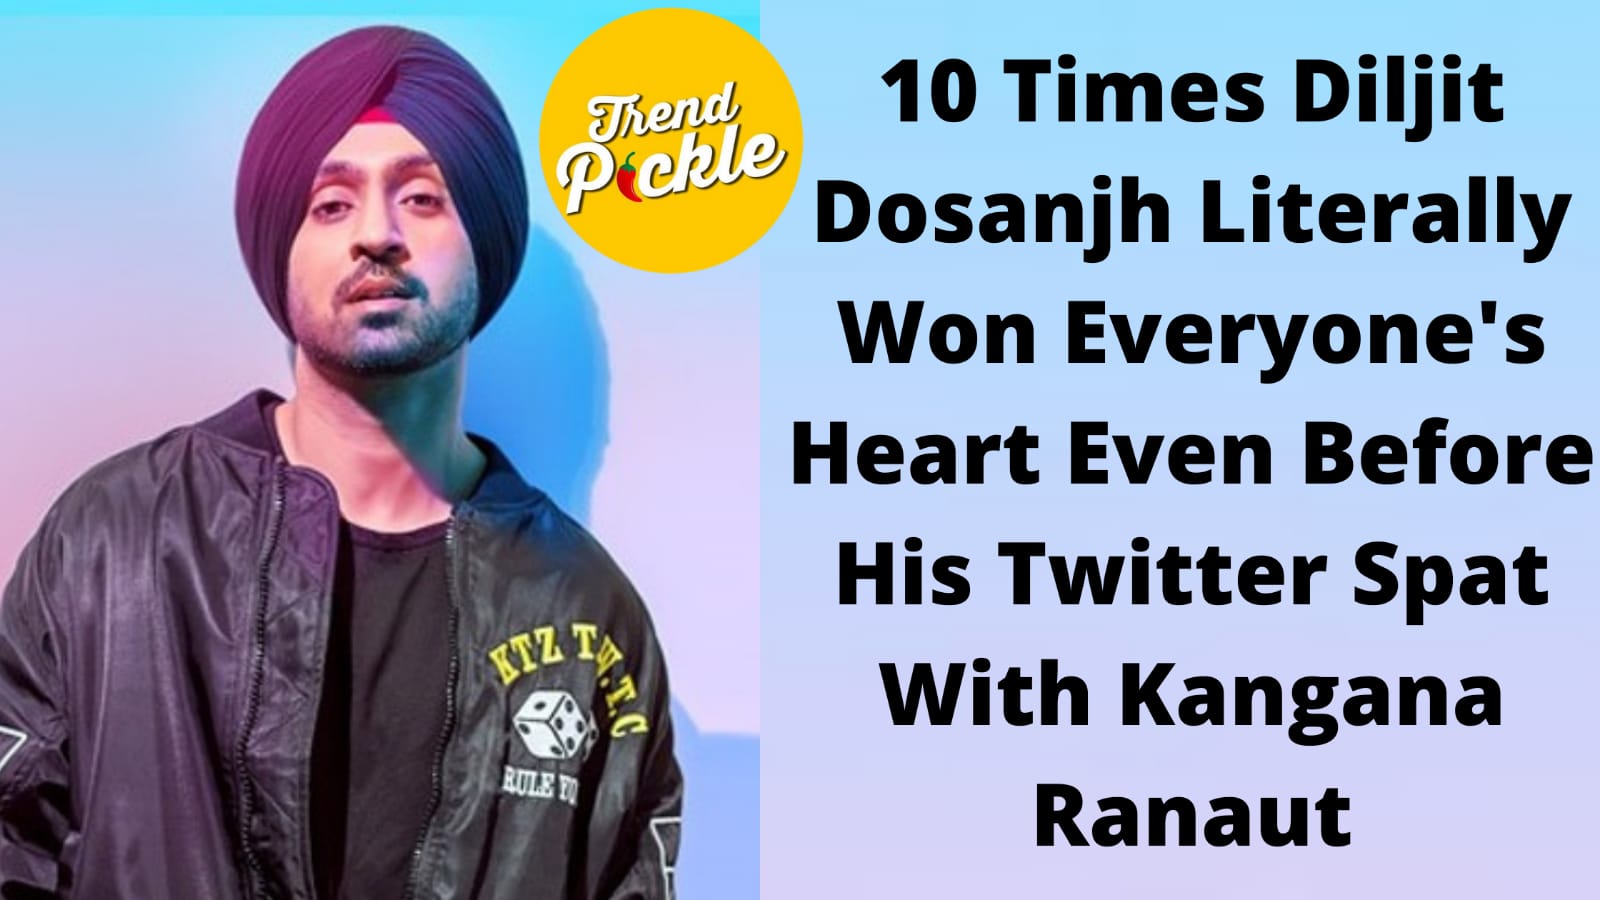 10 Times Diljit Dosanjh Literally Won Everyone’s Heart Even Before His Twitter Spat with Kangana Ranaut